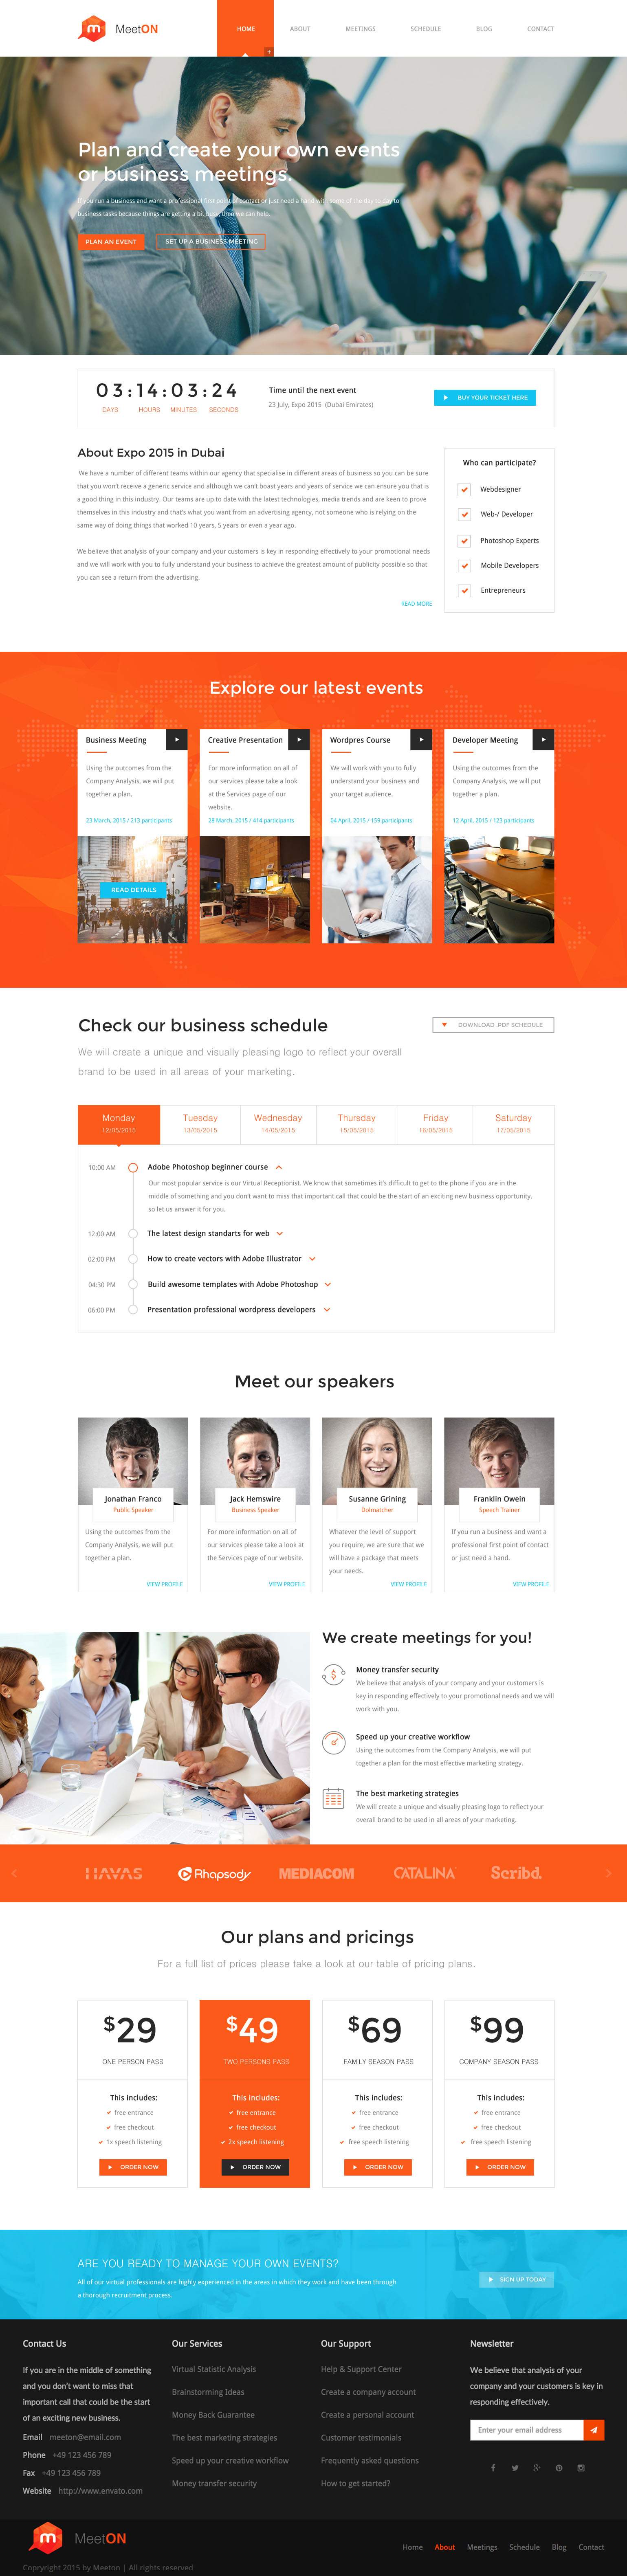 Meeton - Conference & Event PSD Template